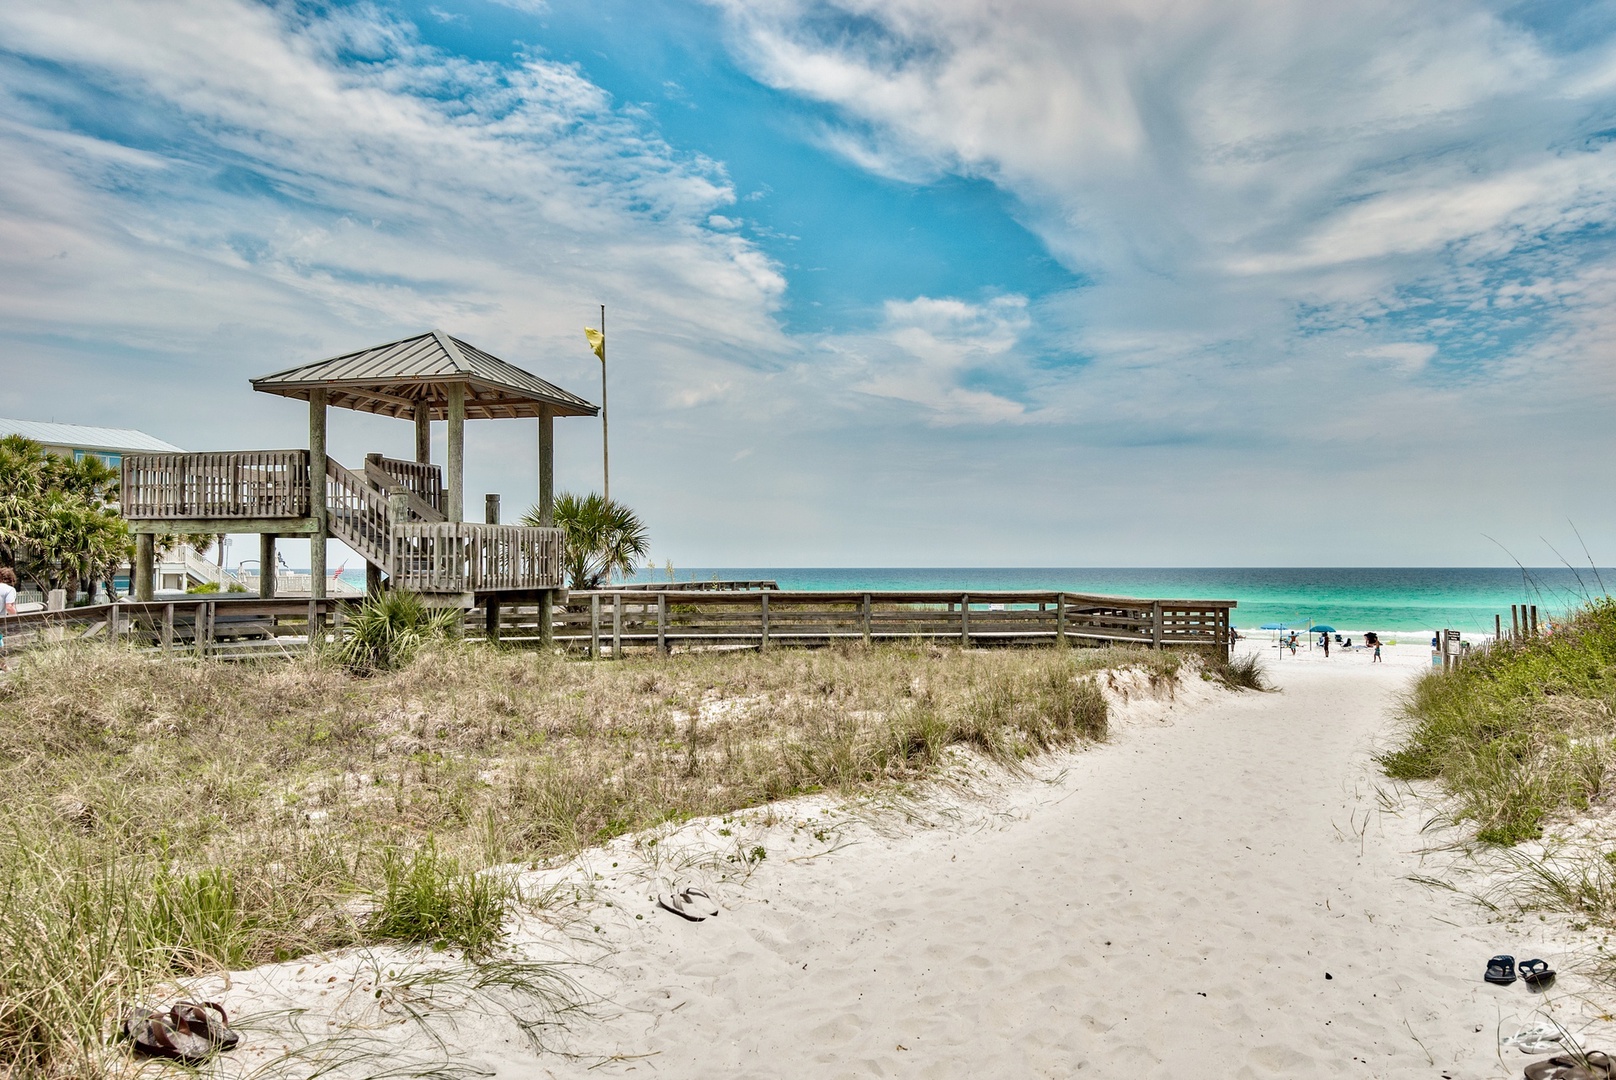 The beautiful beaches of 30A are right down the street!